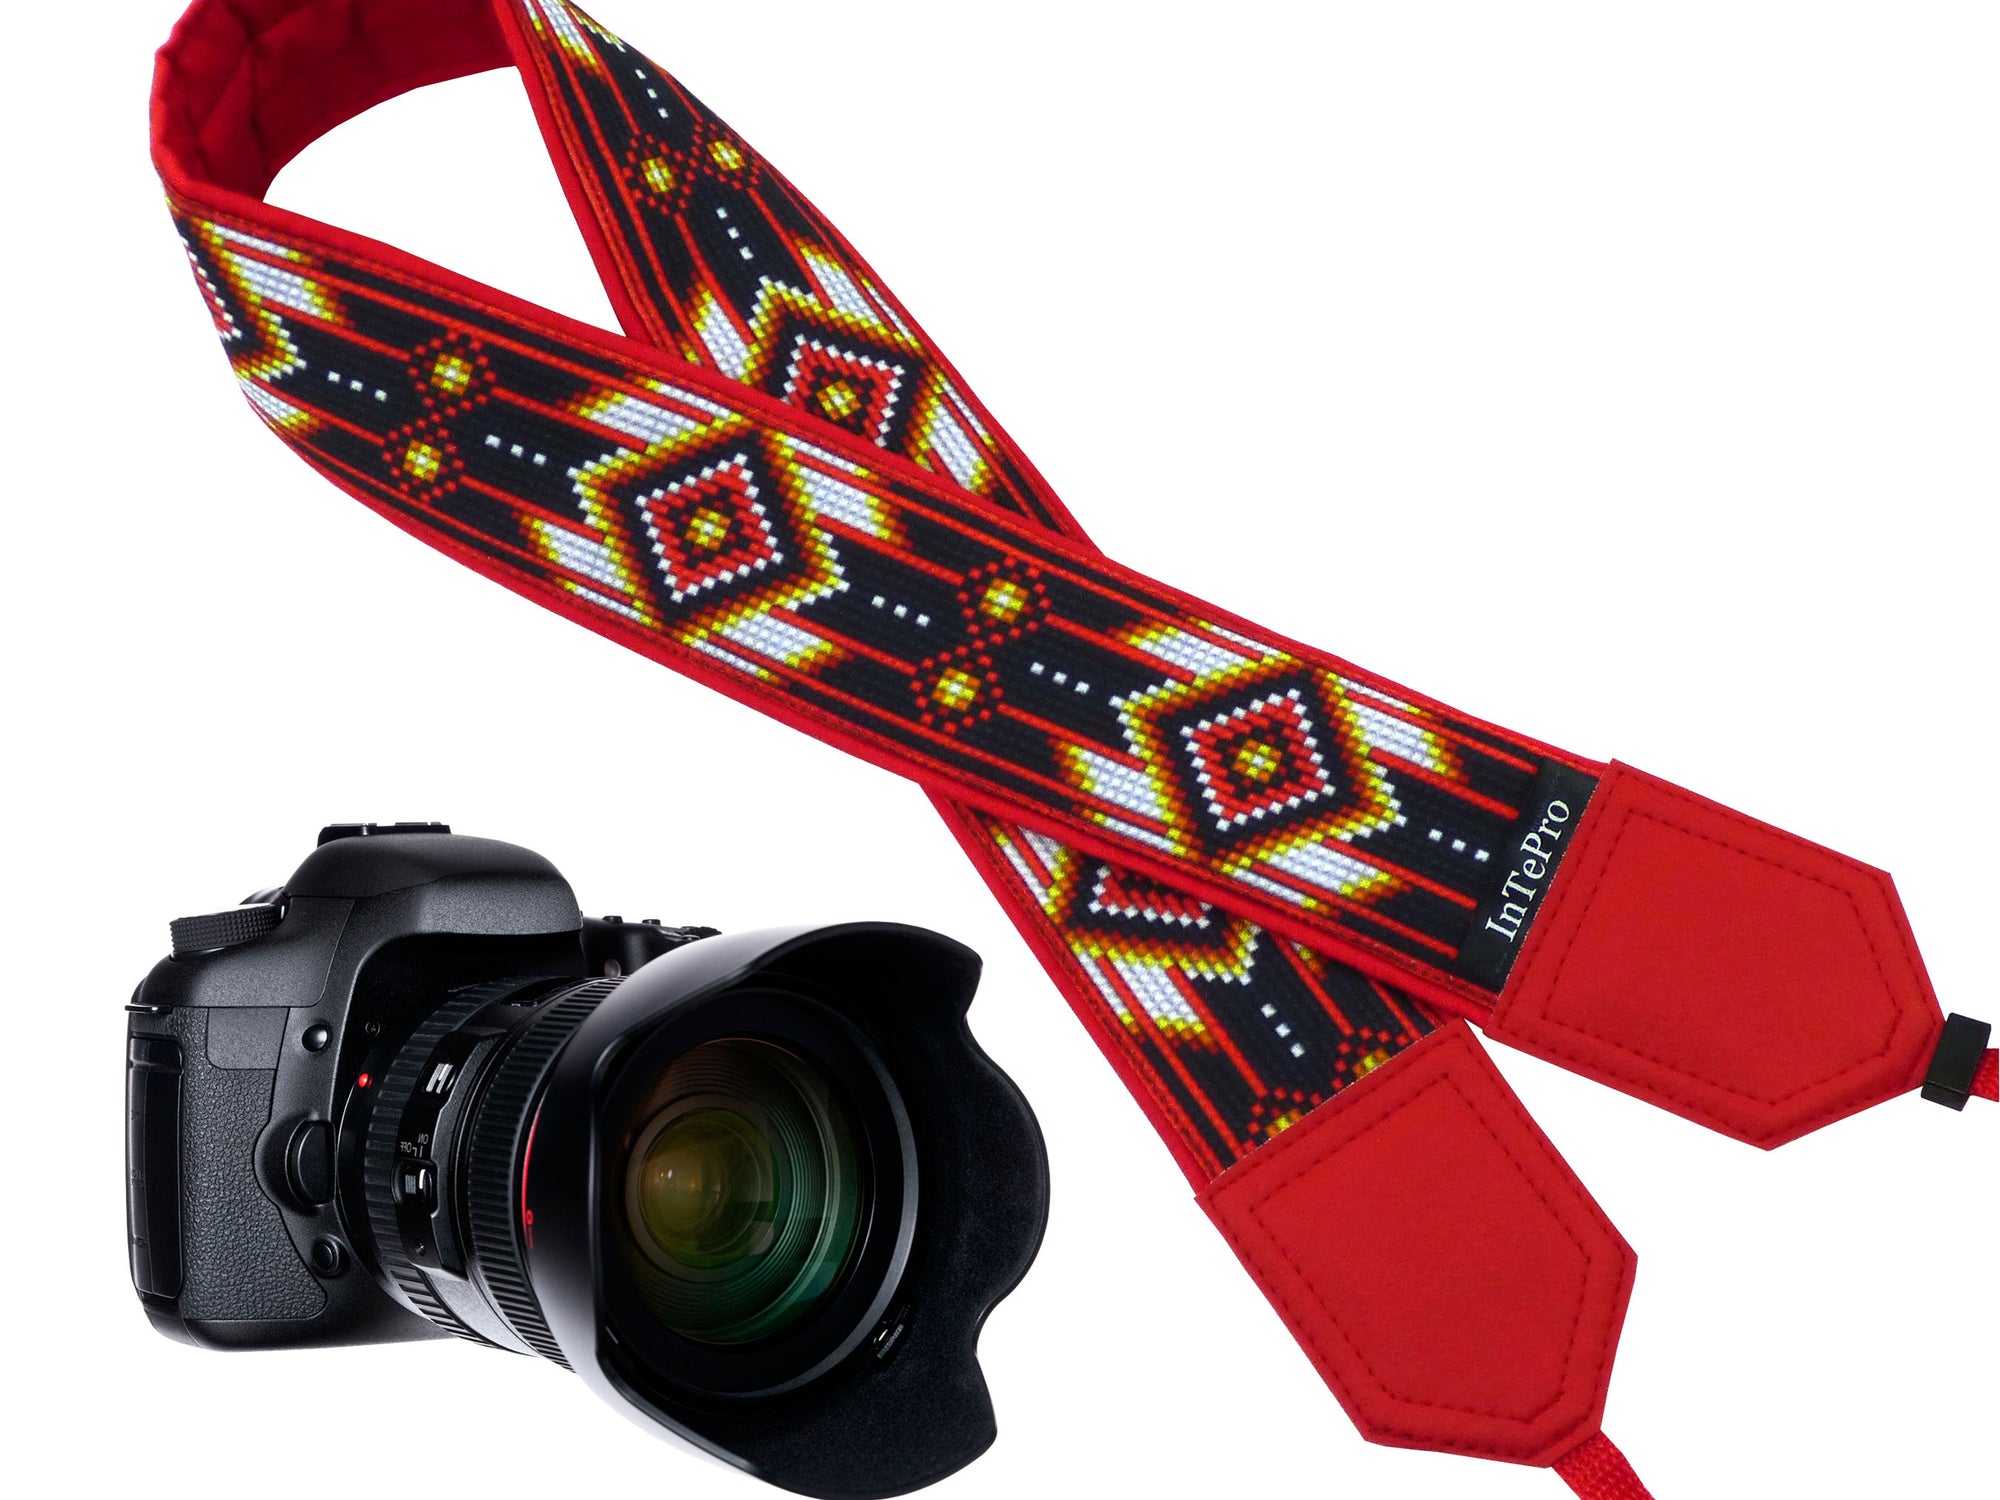 Personalized camera strap with red native design for DSLR and SLR cameras. Gift idea for photographer and traveler. American native motives.